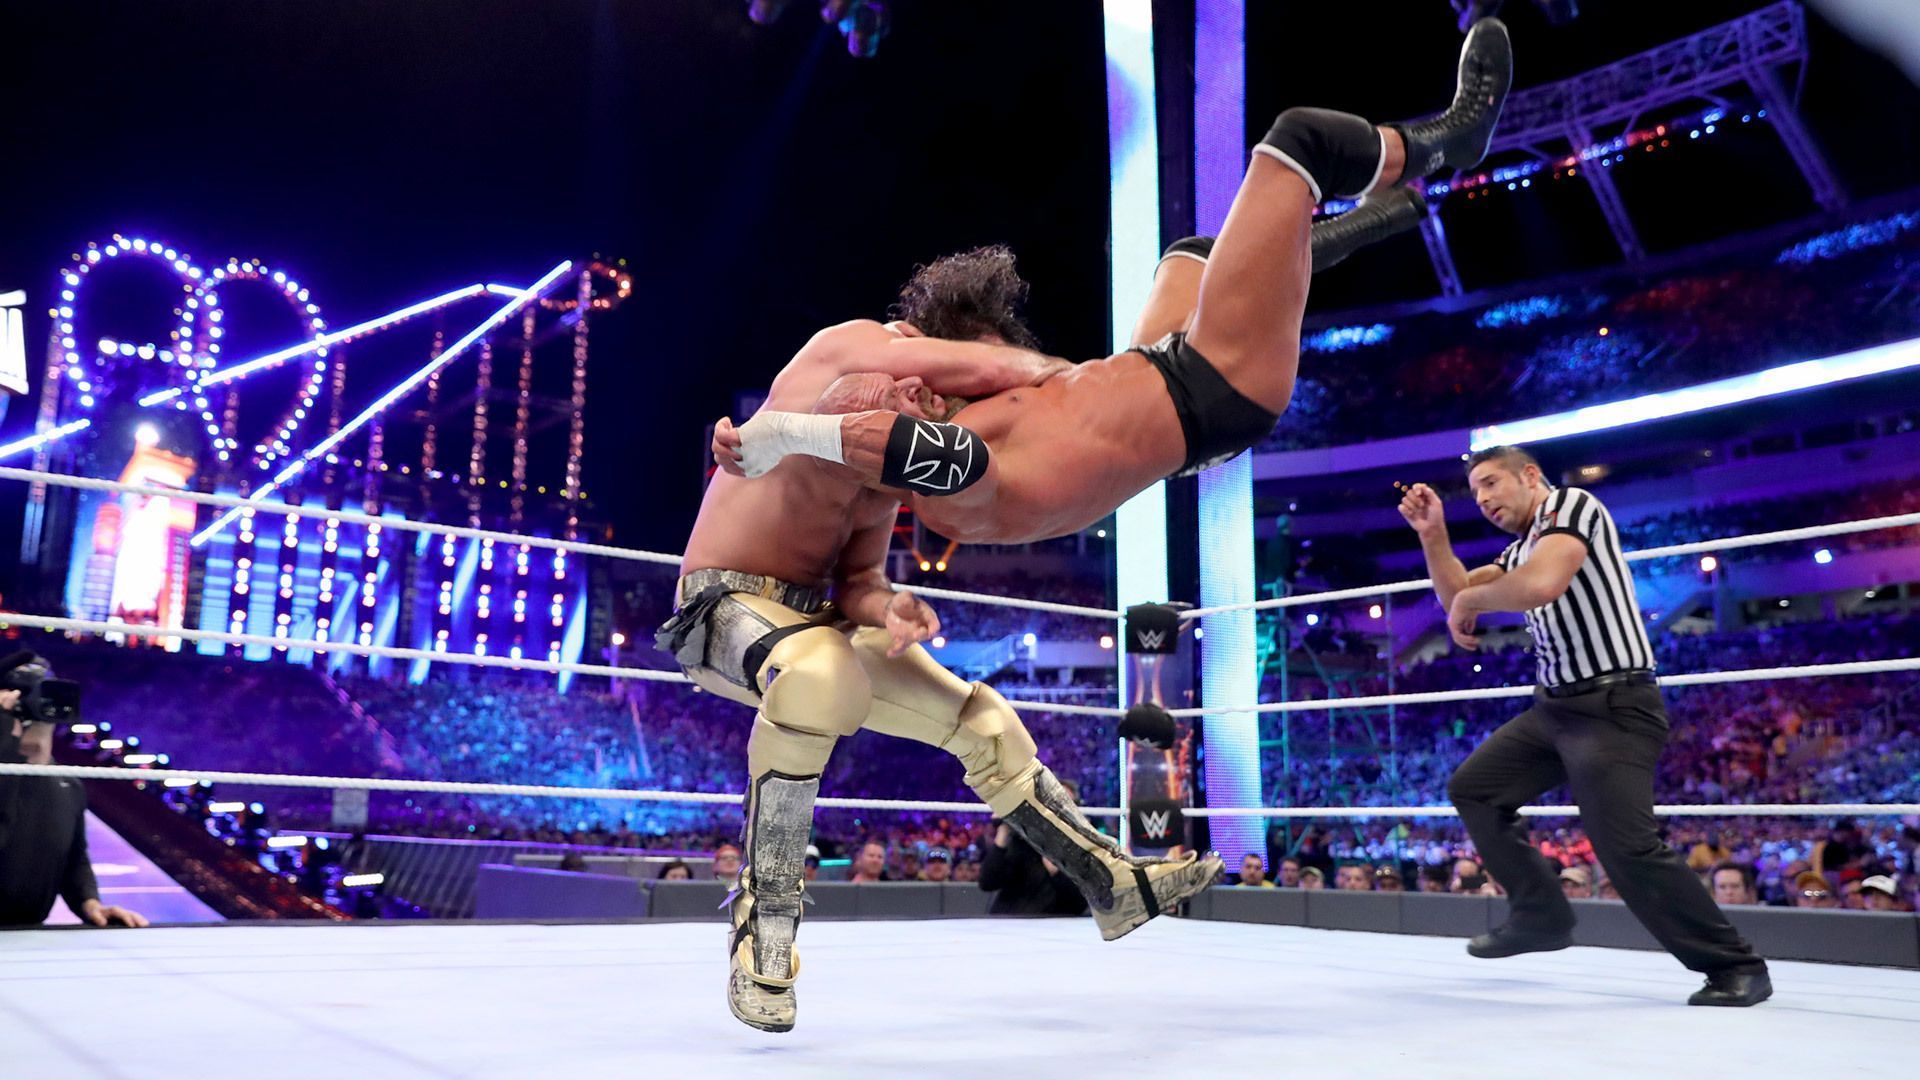 Seth Rollins picked up a huge win at WrestleMania 33